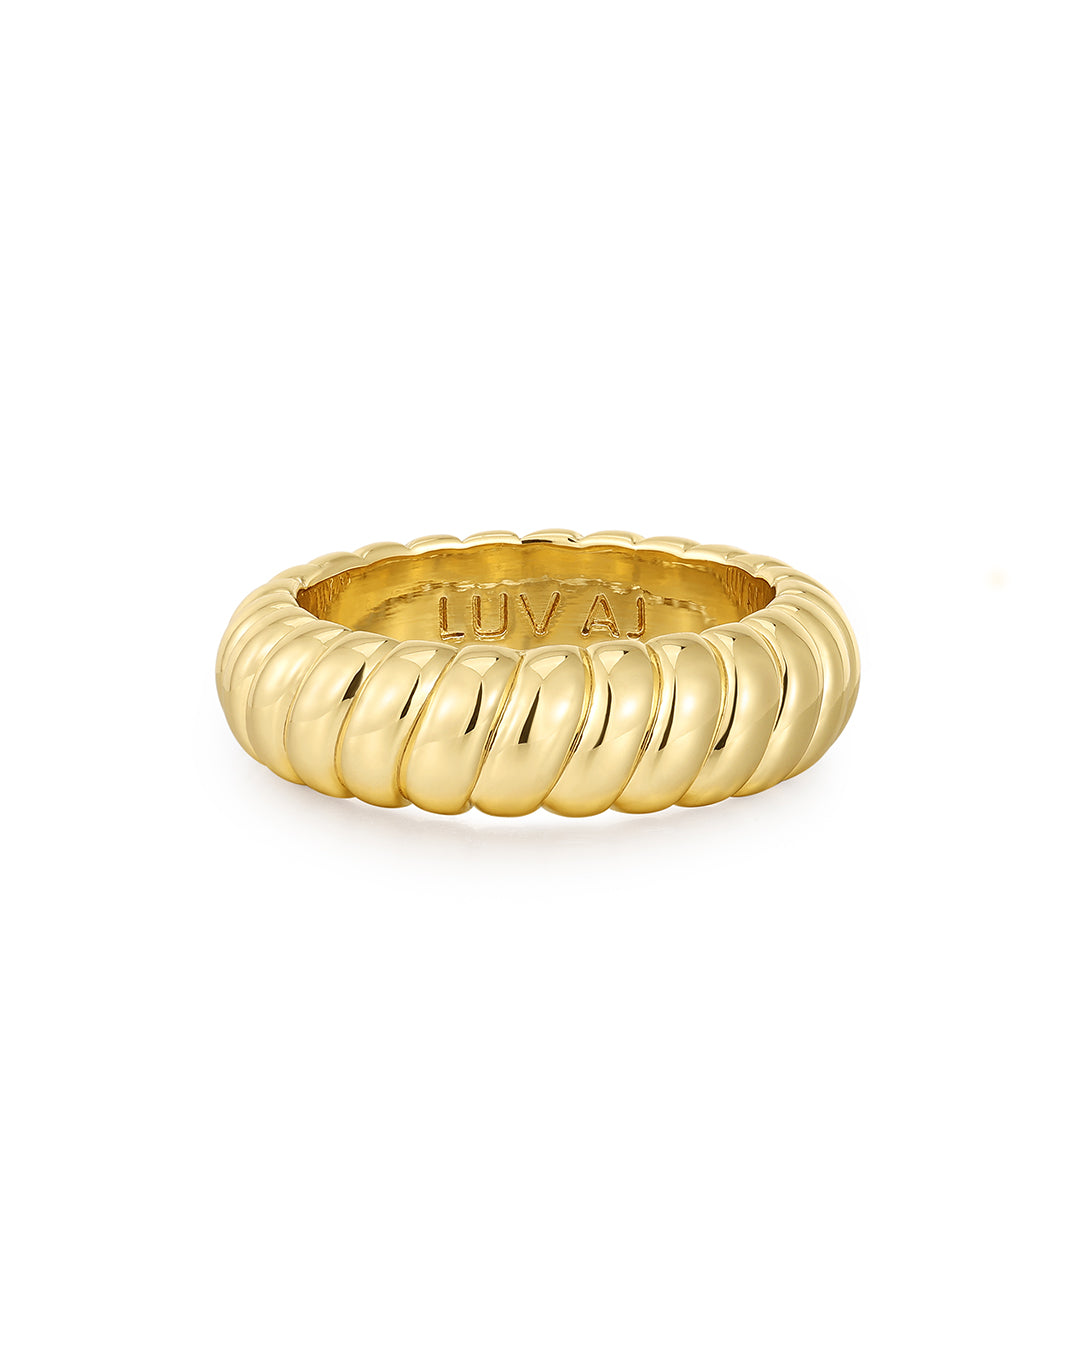 Luv Aj Ridged Marbella Band Stacking Ring in 14k Gold Plated